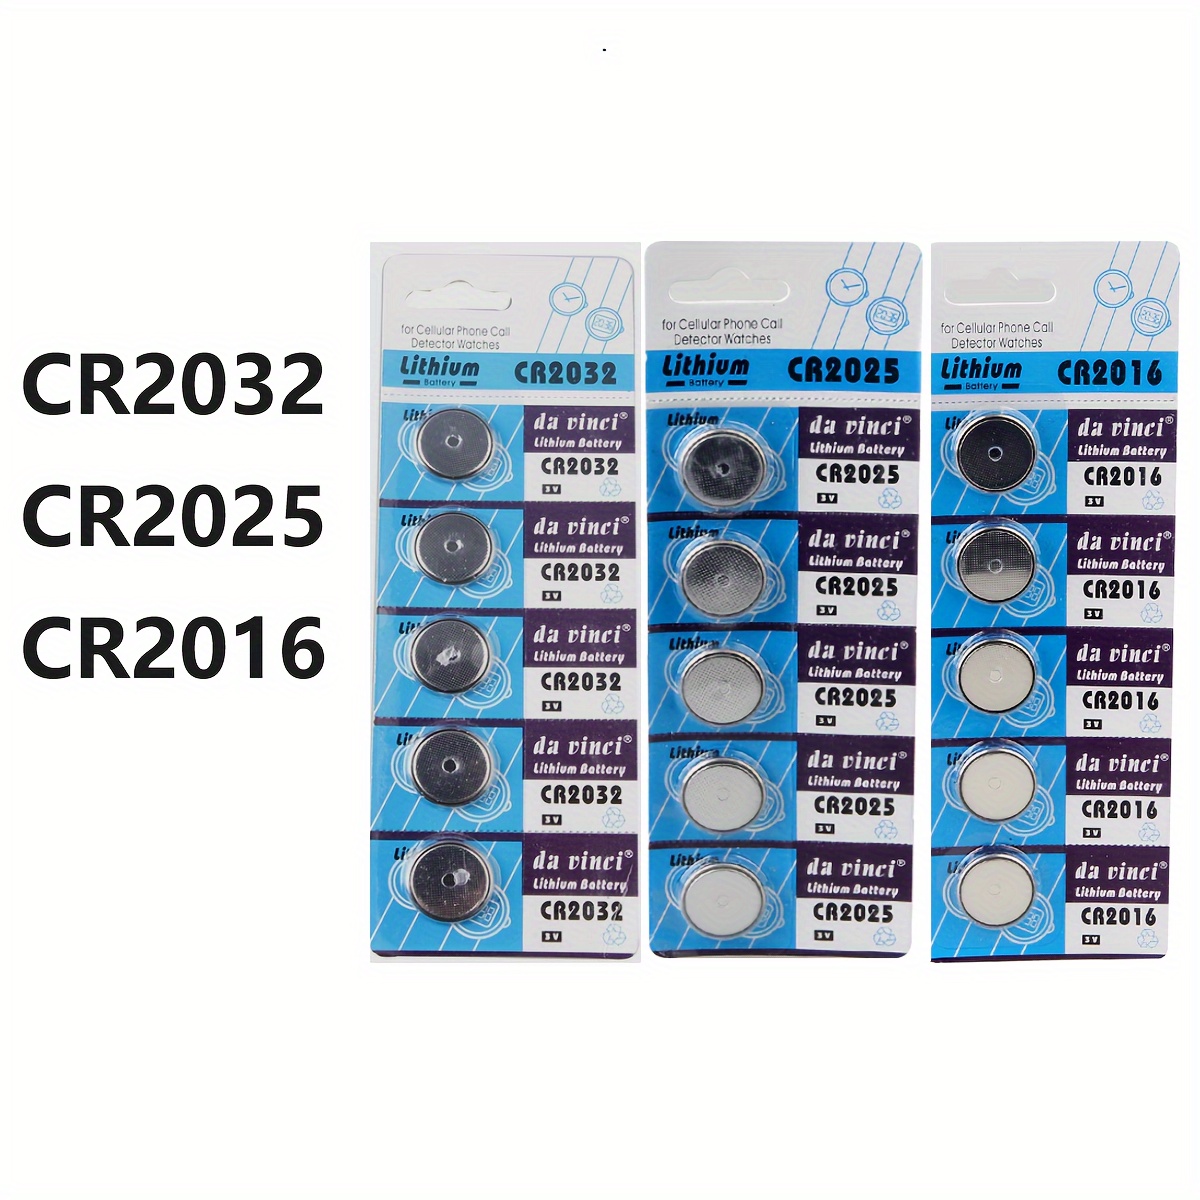 Perfect replacement for CR2032, LIR2032 2025 2016 1632 button battery  charger replaces CR2032, which quickly charges in one hour and requires a  rechar